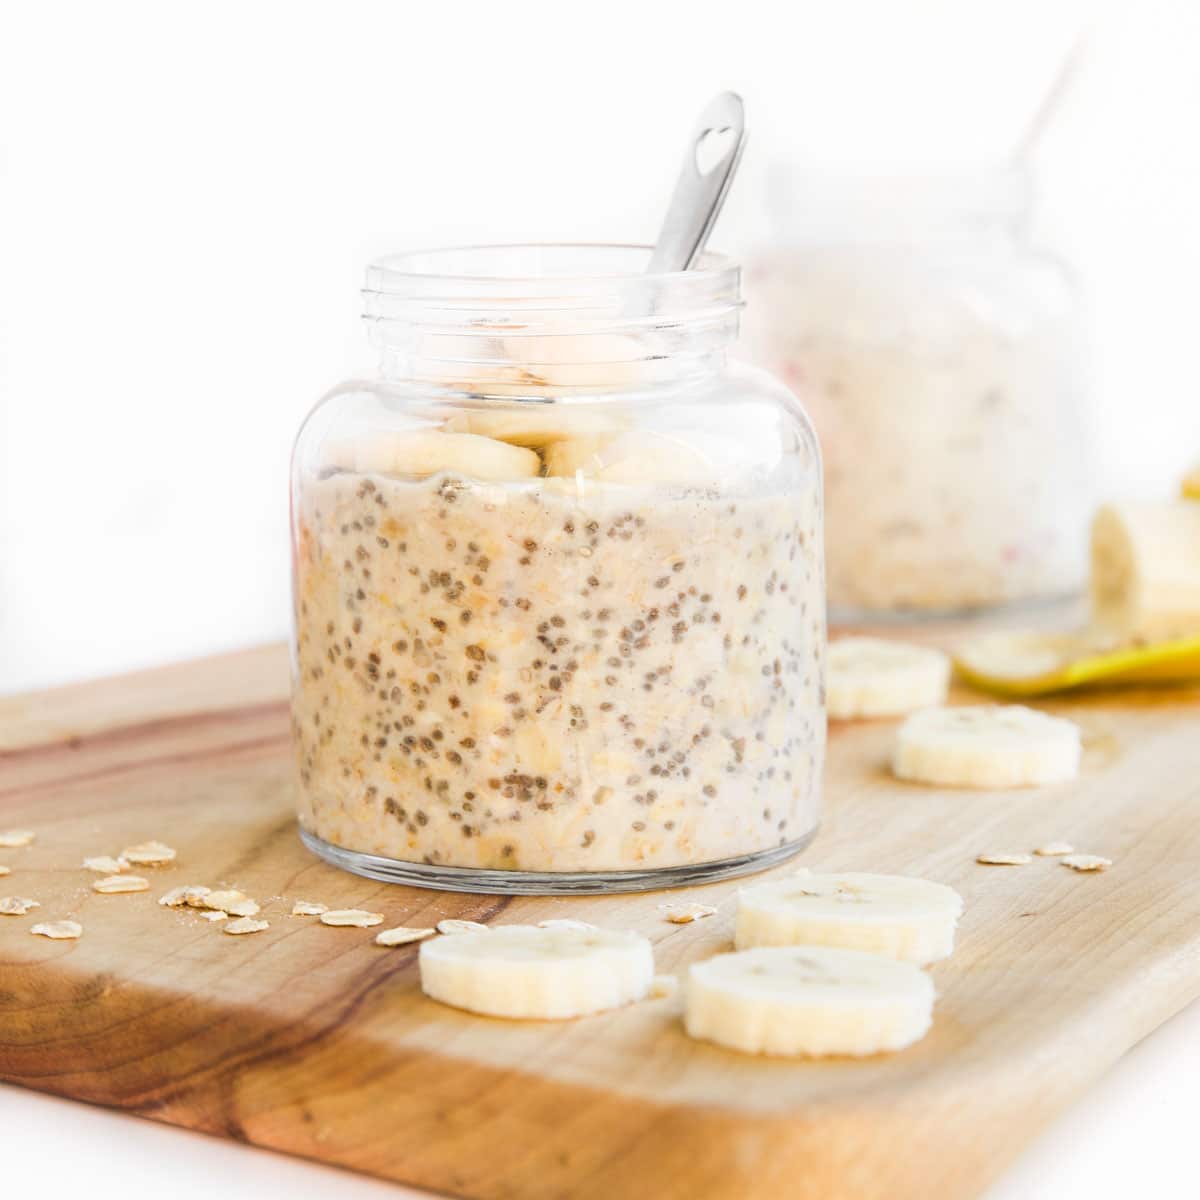 Banana Overnight Oats in Glass Jar Sitting on Wooding Chopping Board with Slices of Banana and Oats Scattered.